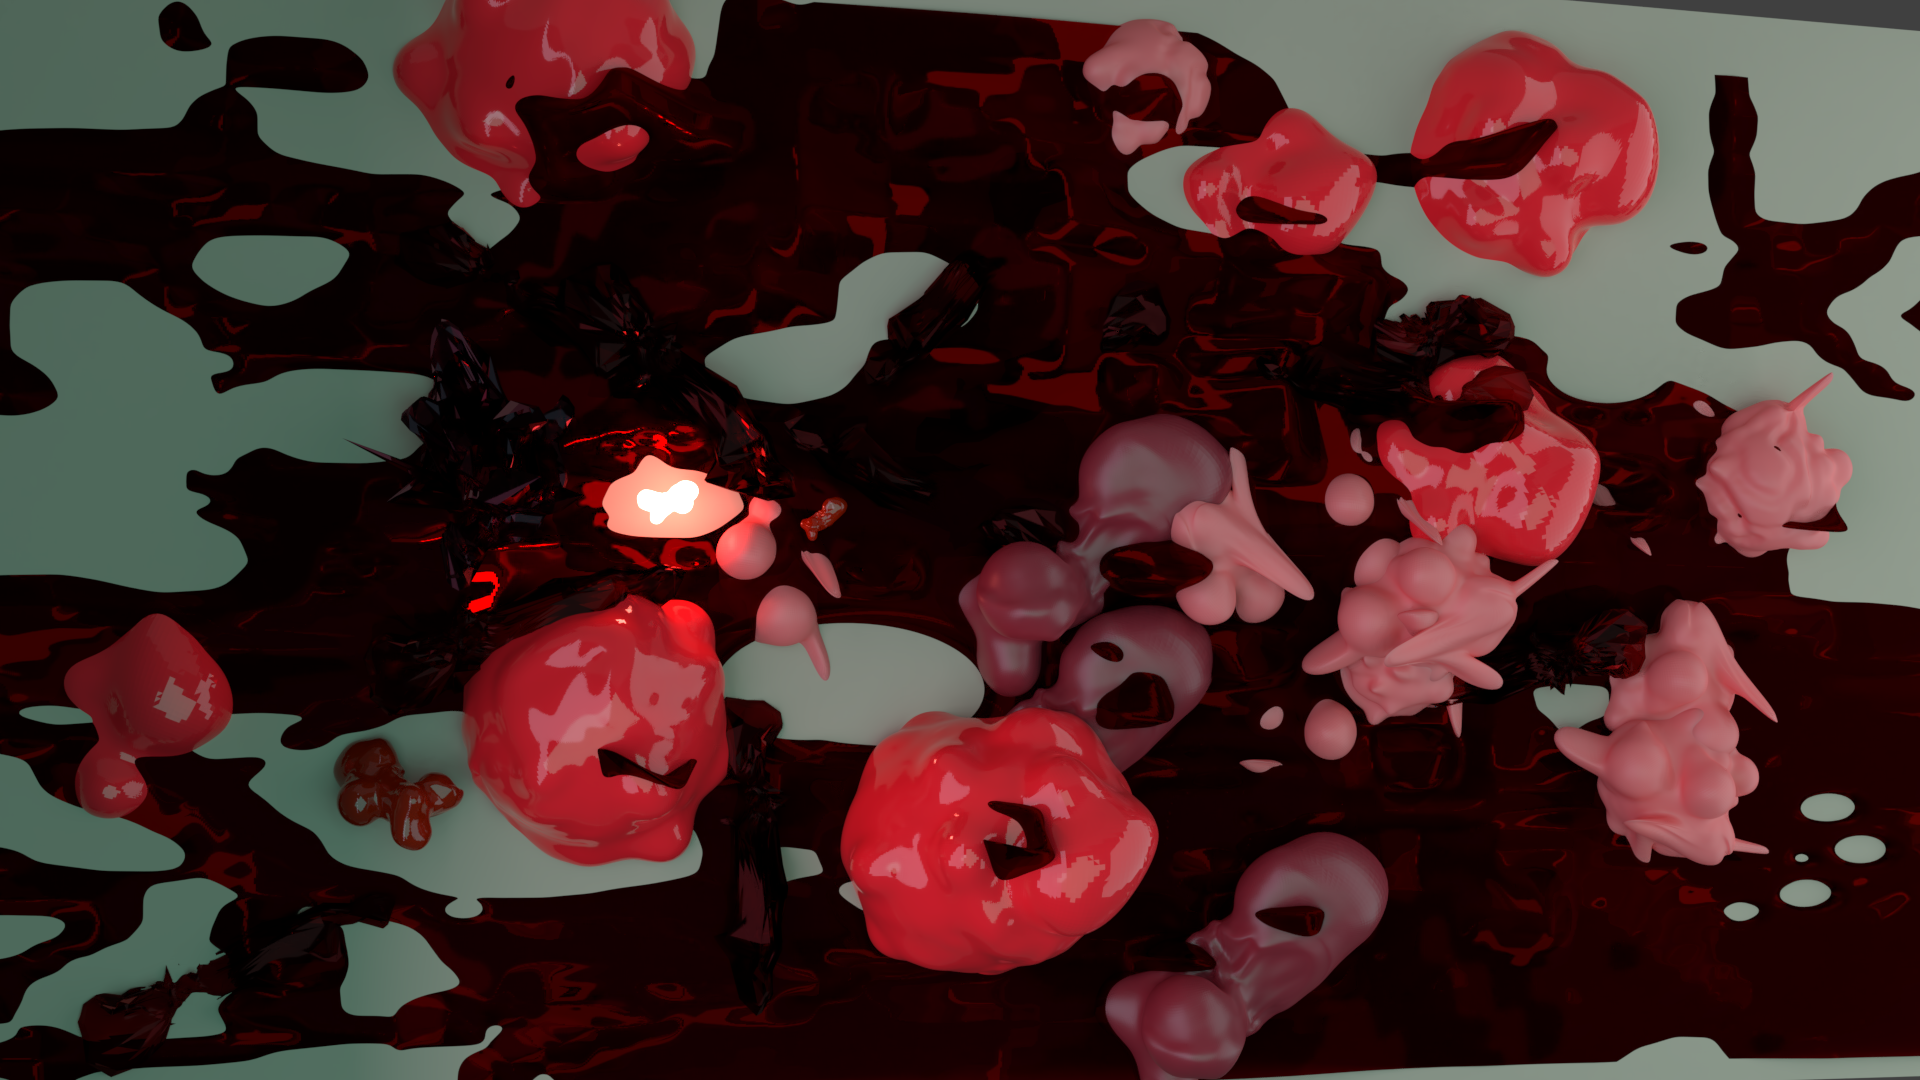 blood on table.png